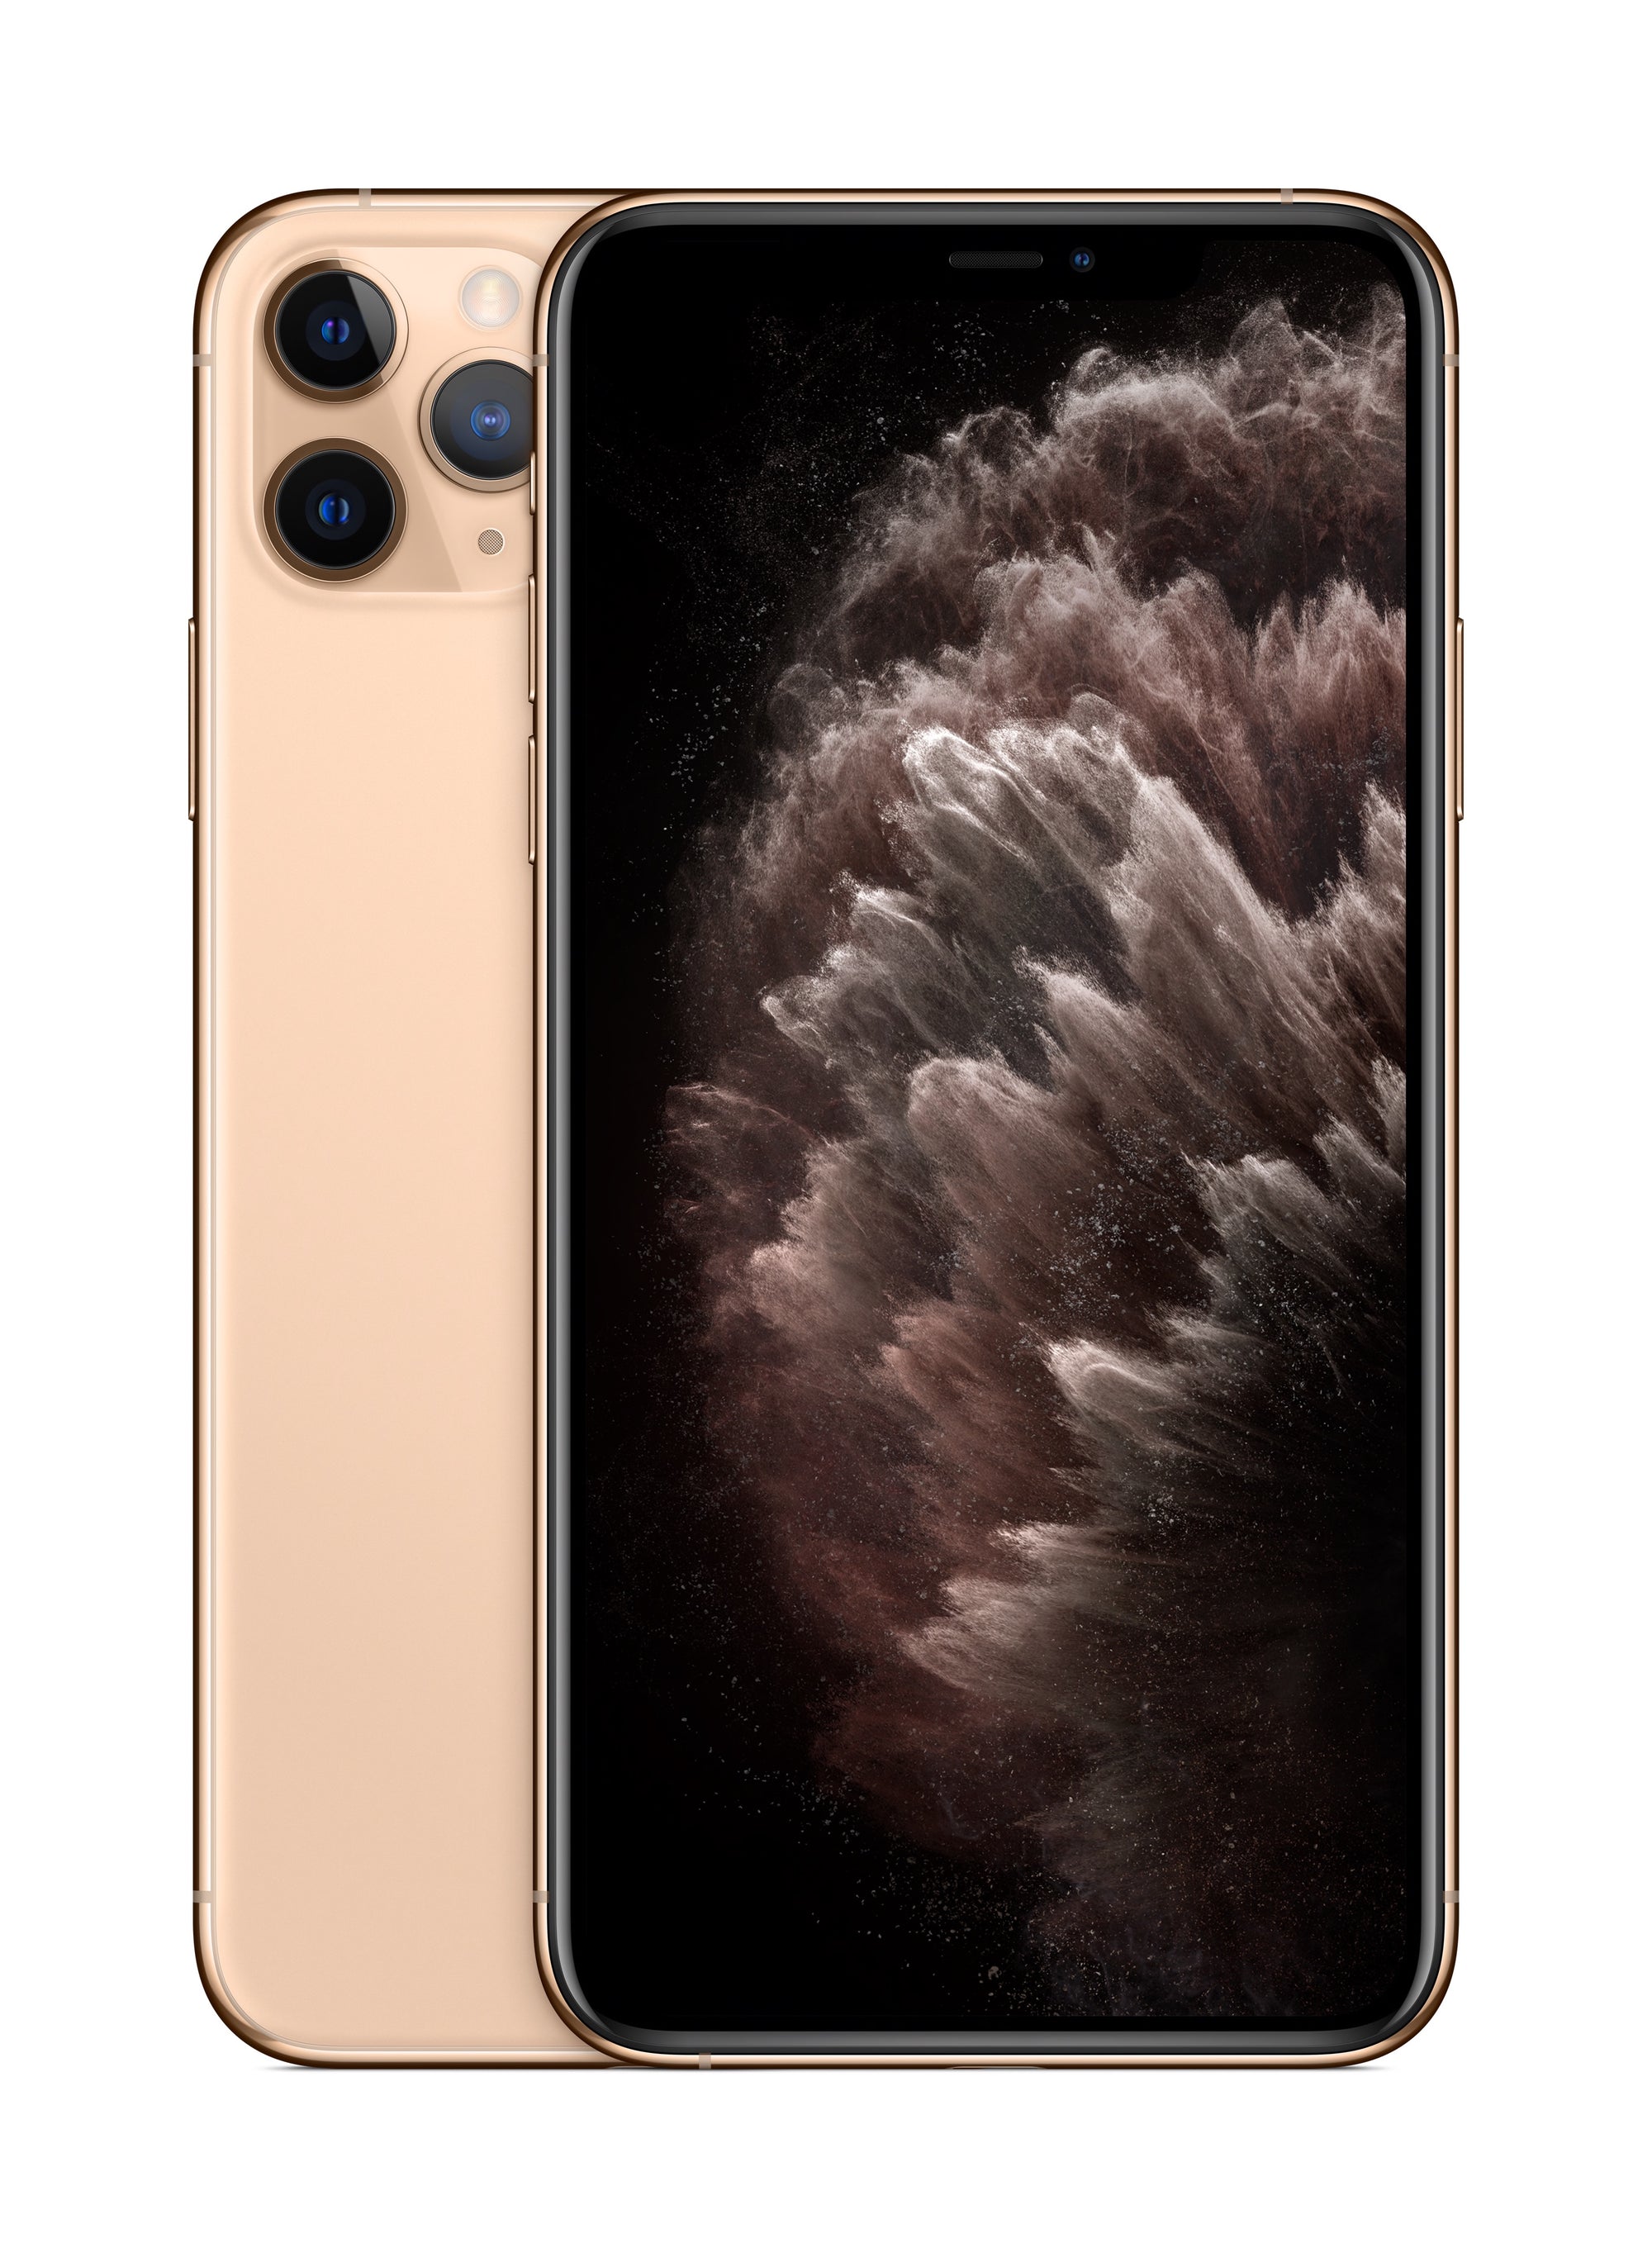 iPhone 11 Pro 512GB - Gold - iStore Namibia